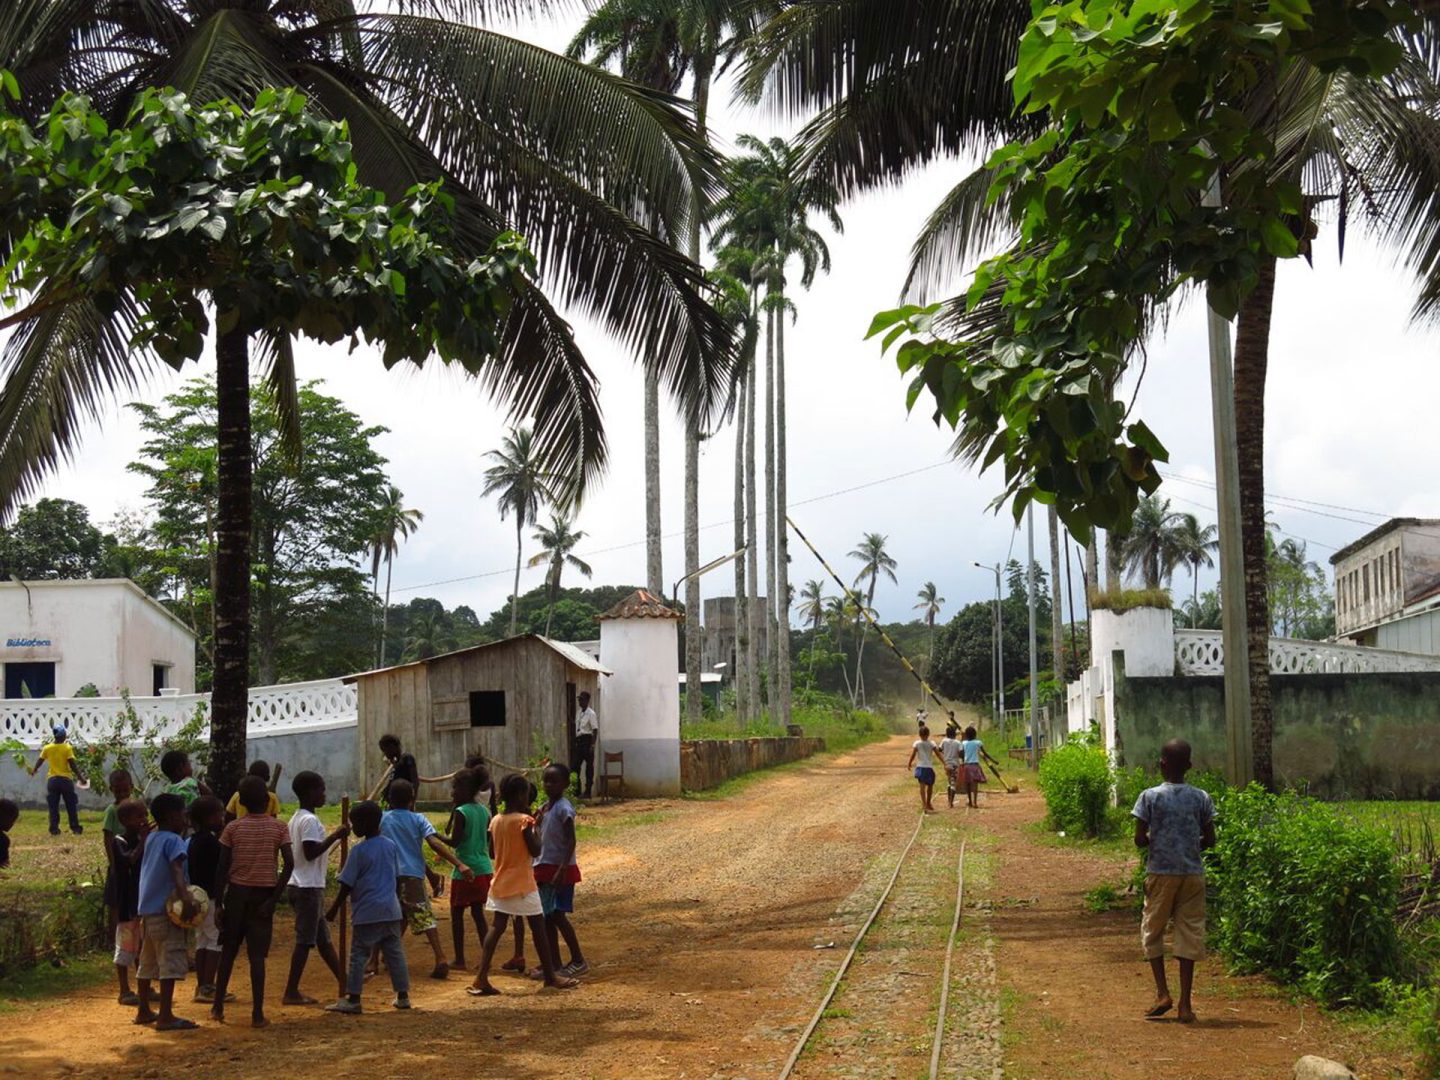 A small but bustling community - the old railway line used to transport the cacao on the island.